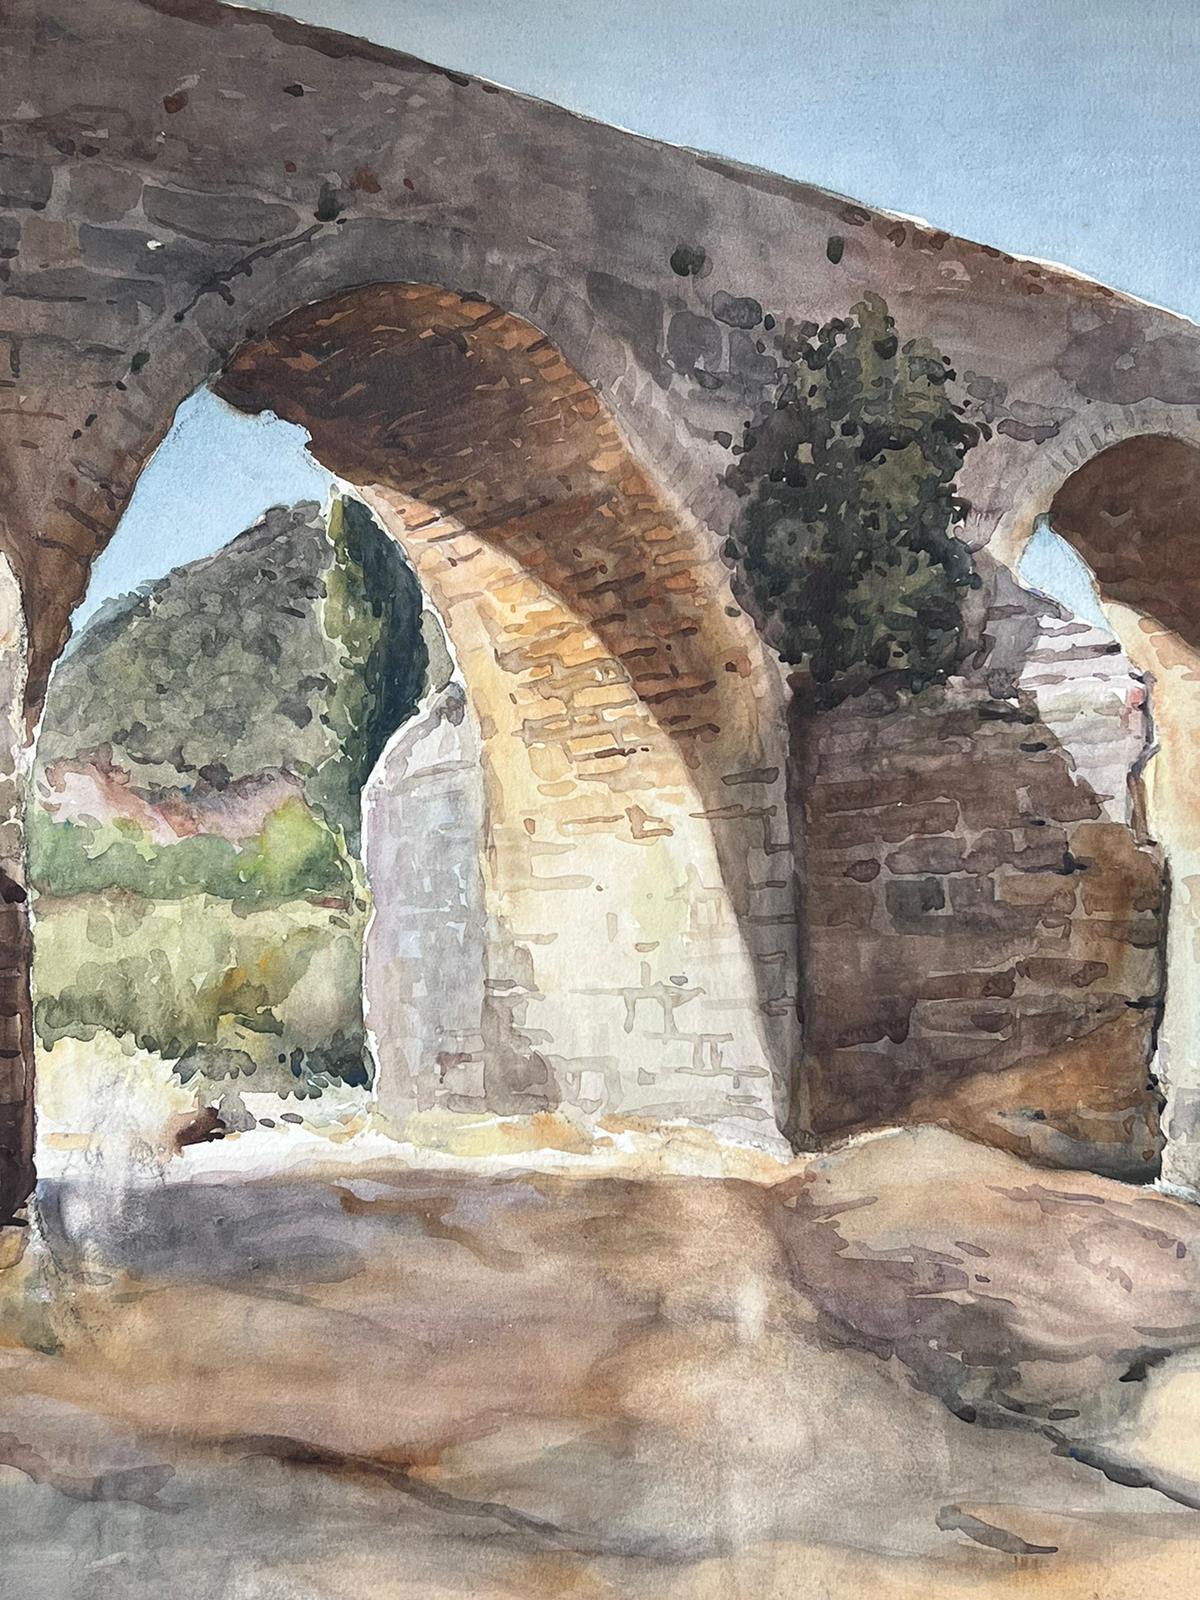 Jean La Forgue (French 1901-1975)  watercolour on paper, unframed
painting: 26.5 x 20 inches
provenance: the artists estate, France
condition: very good and sound condition; there are minor age related marks and stains to the surface simply caused